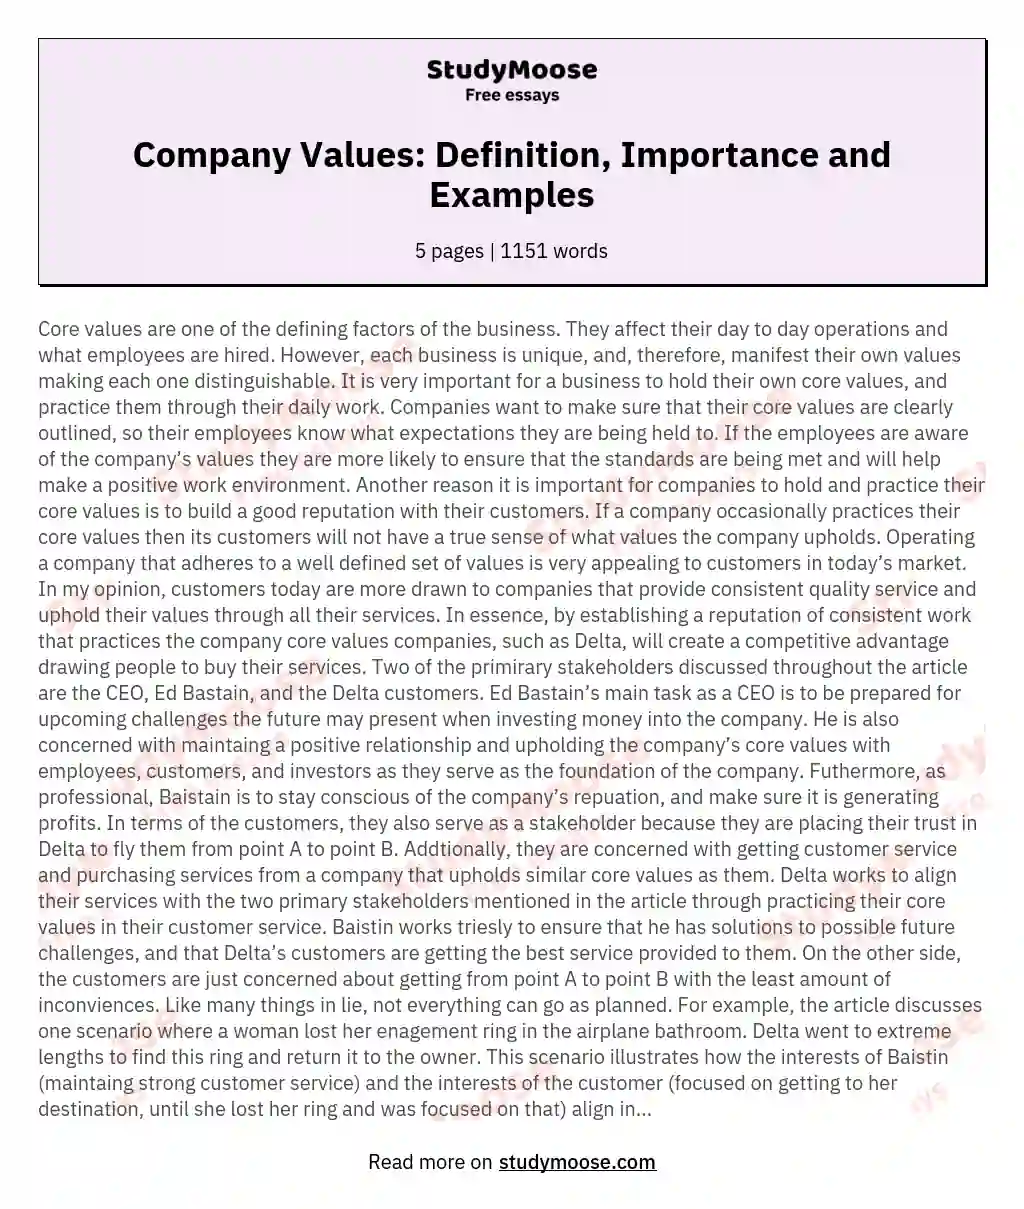 Company Values: Definition, Importance and Examples essay